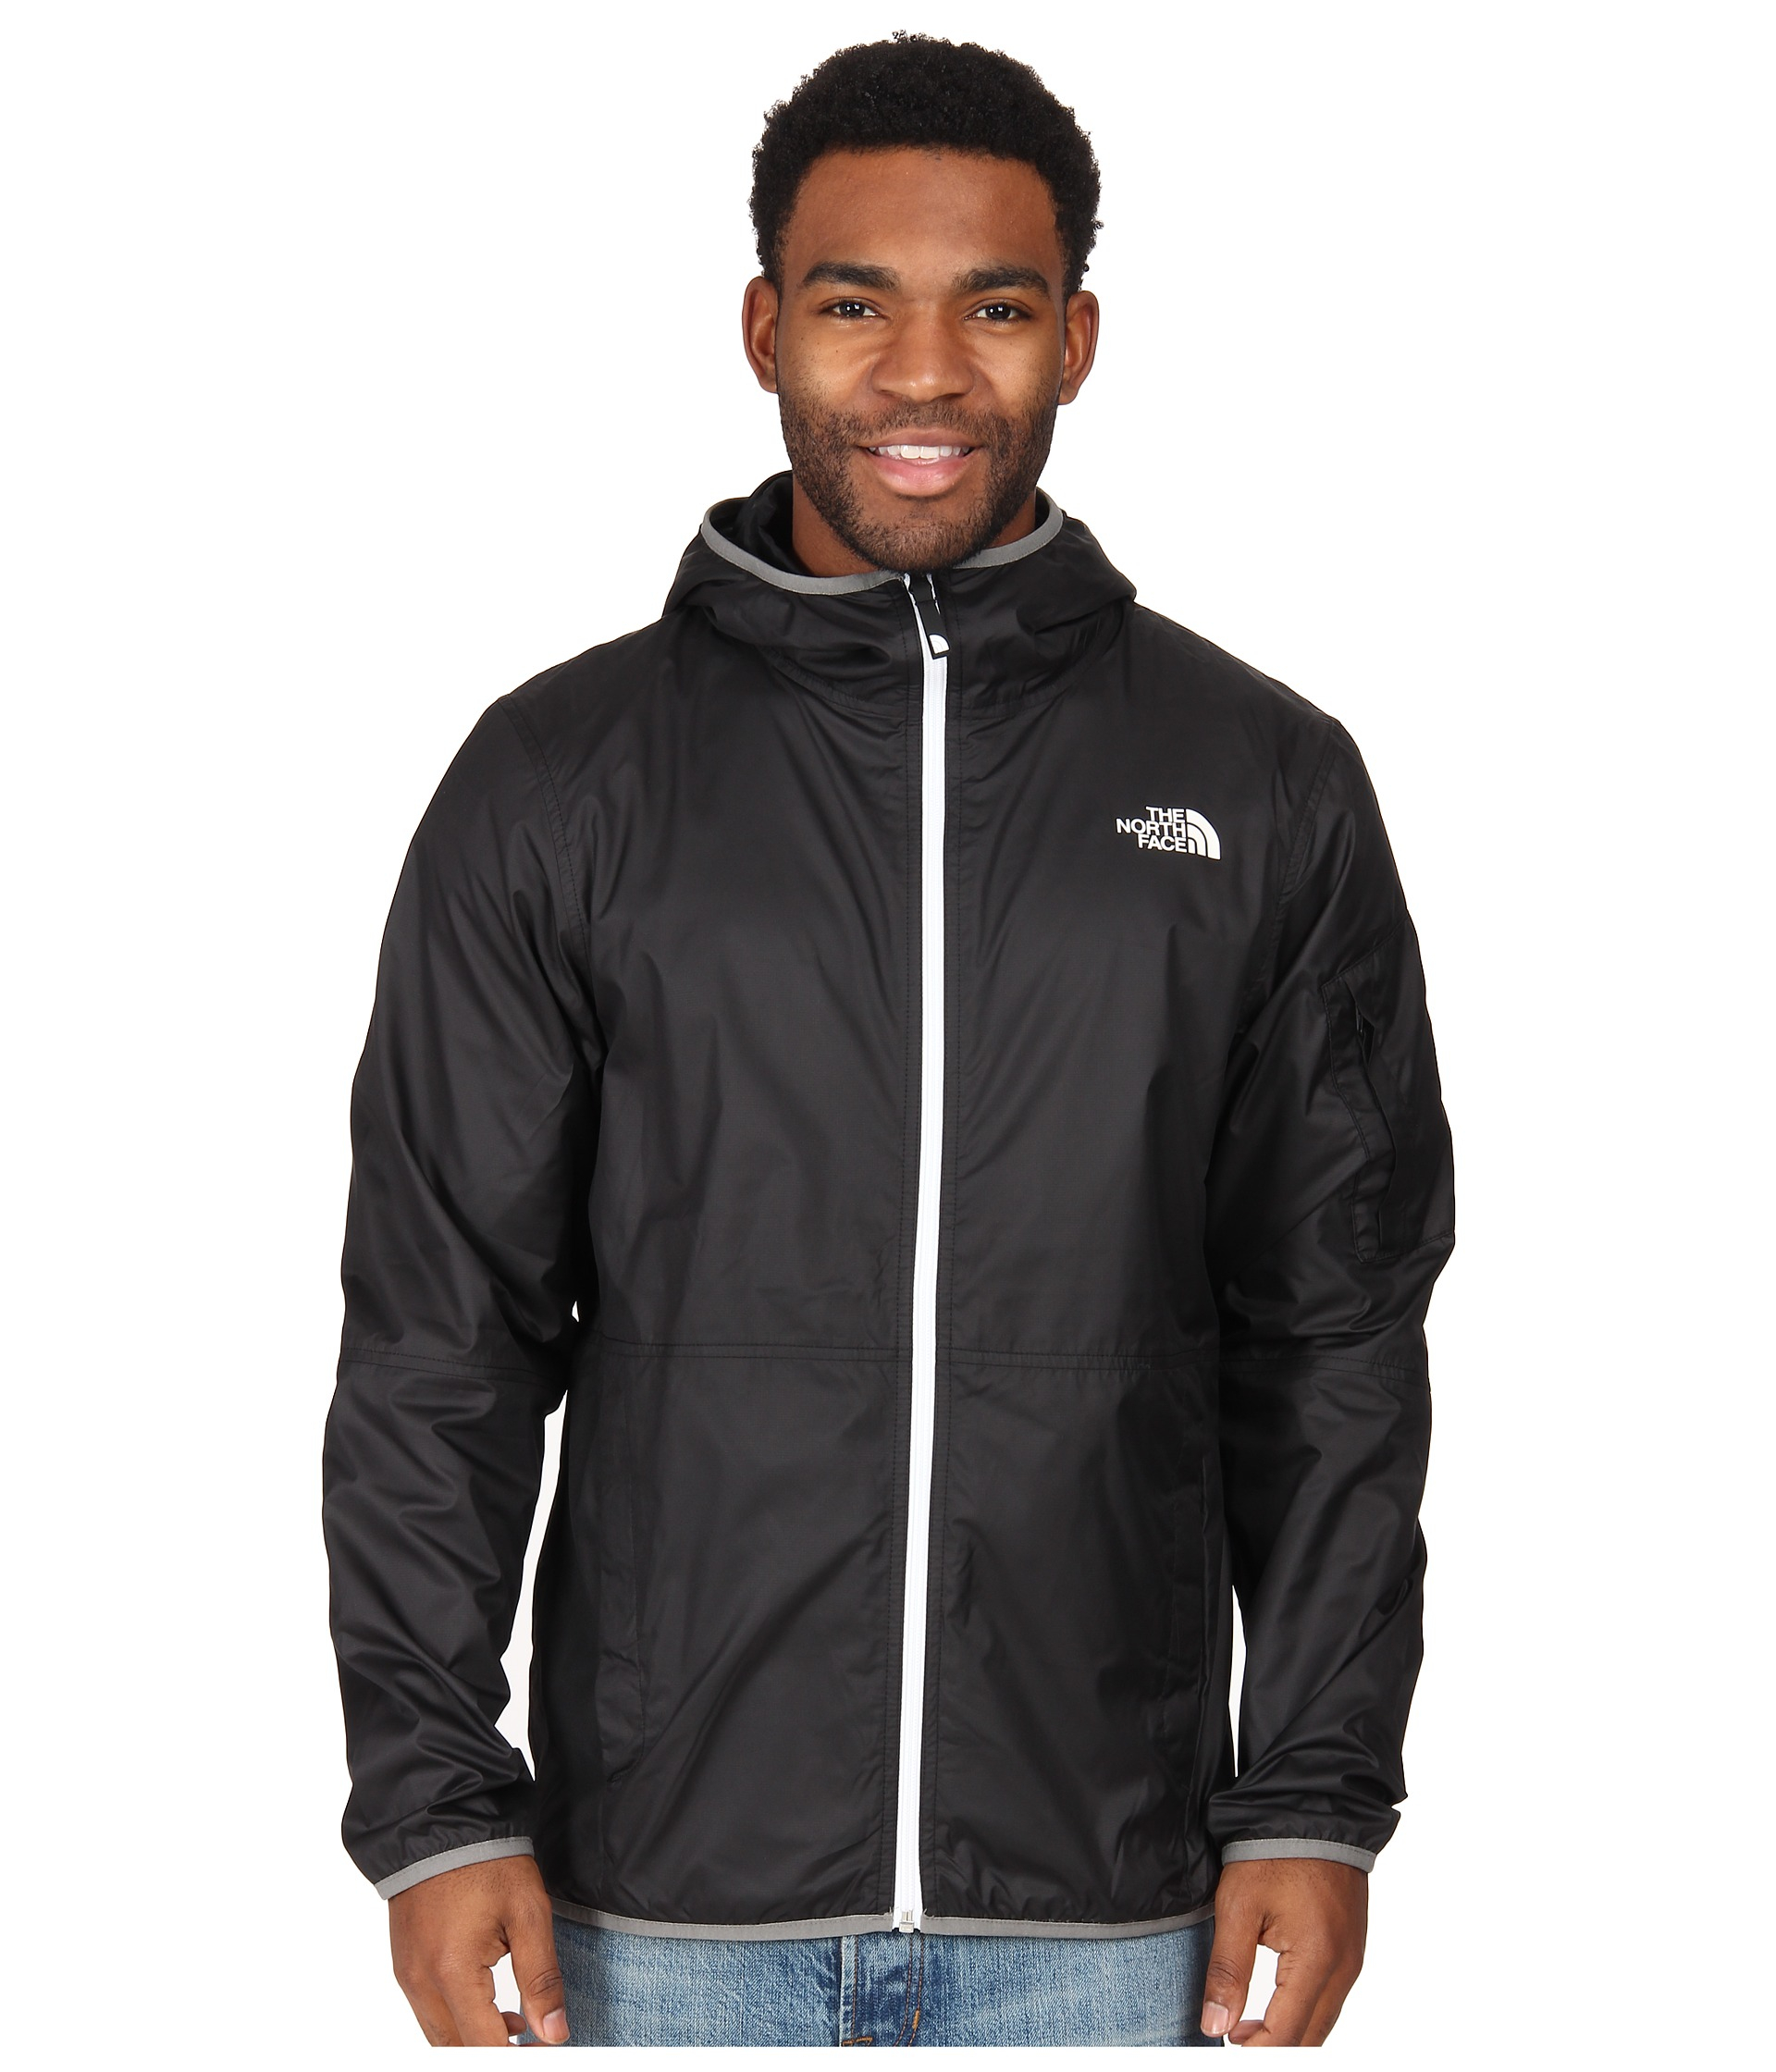 Lyst - The North Face Chicago Wind Jacket in Black for Men